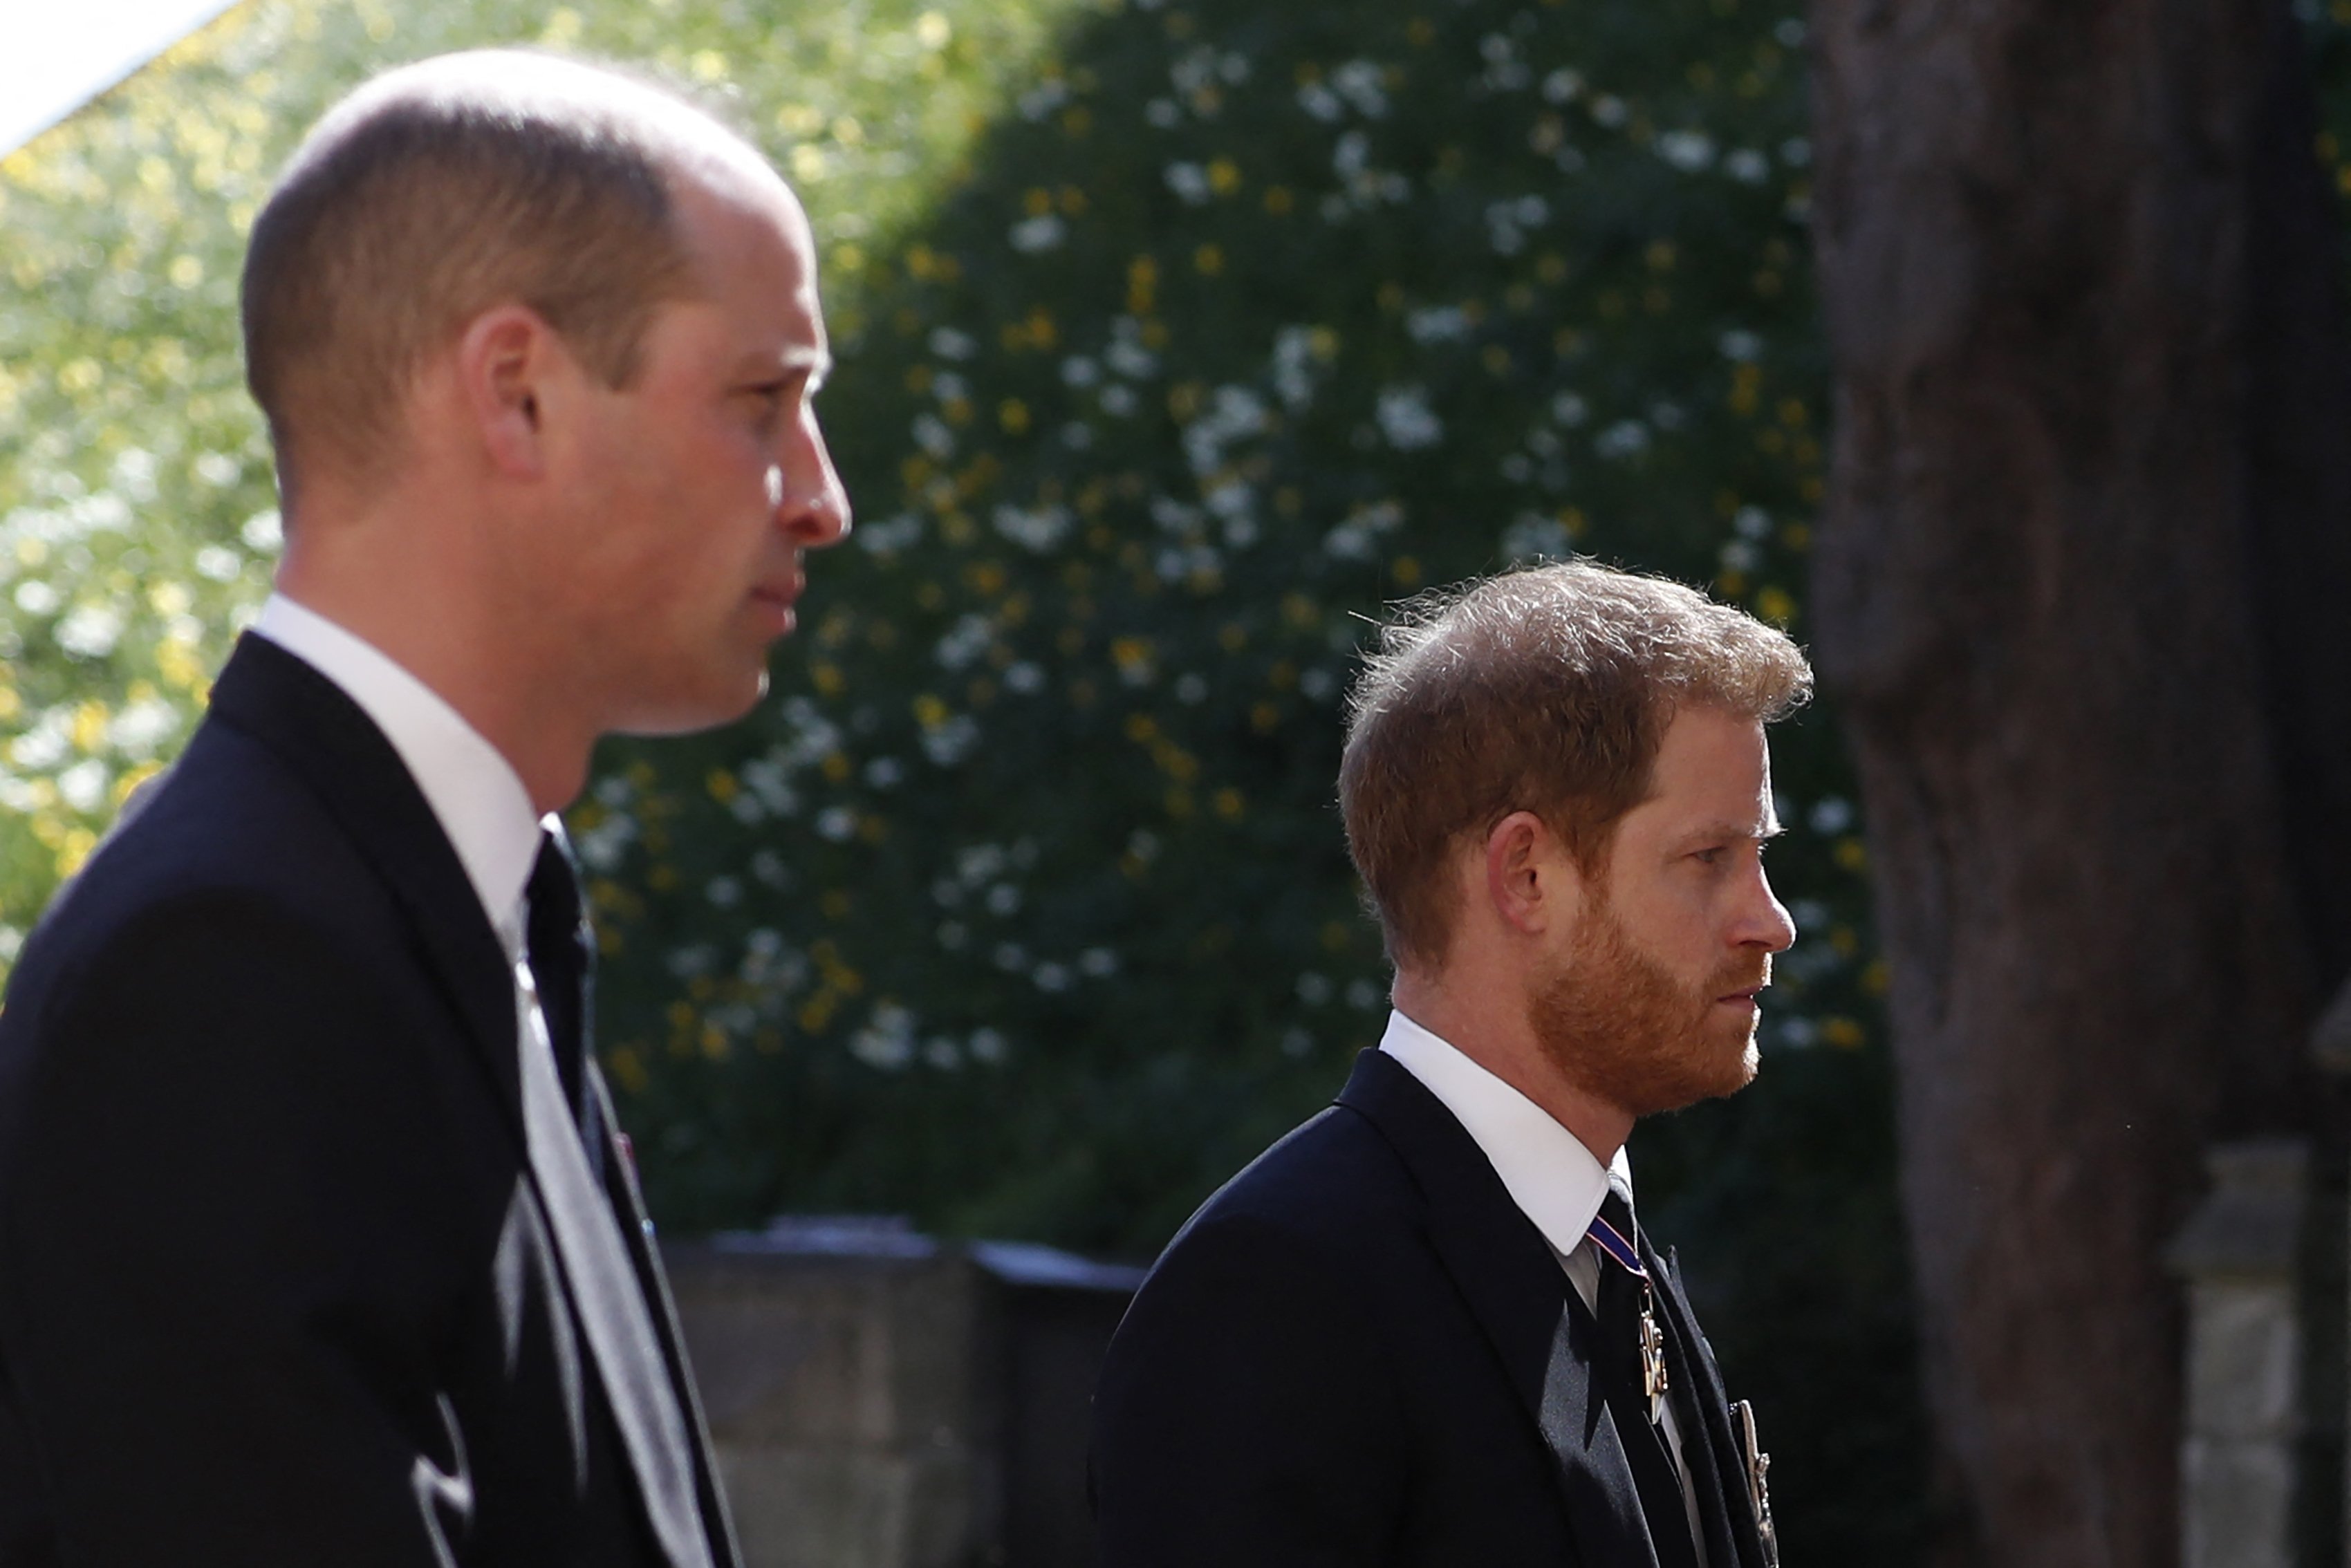 Prince William and Prince Harry pictured following the coffin during the ceremonial funeral procession of Prince Philip to St George's Chapel in Windsor Castle on April 17, 2021 in Windsor, London. / Source: Getty Images